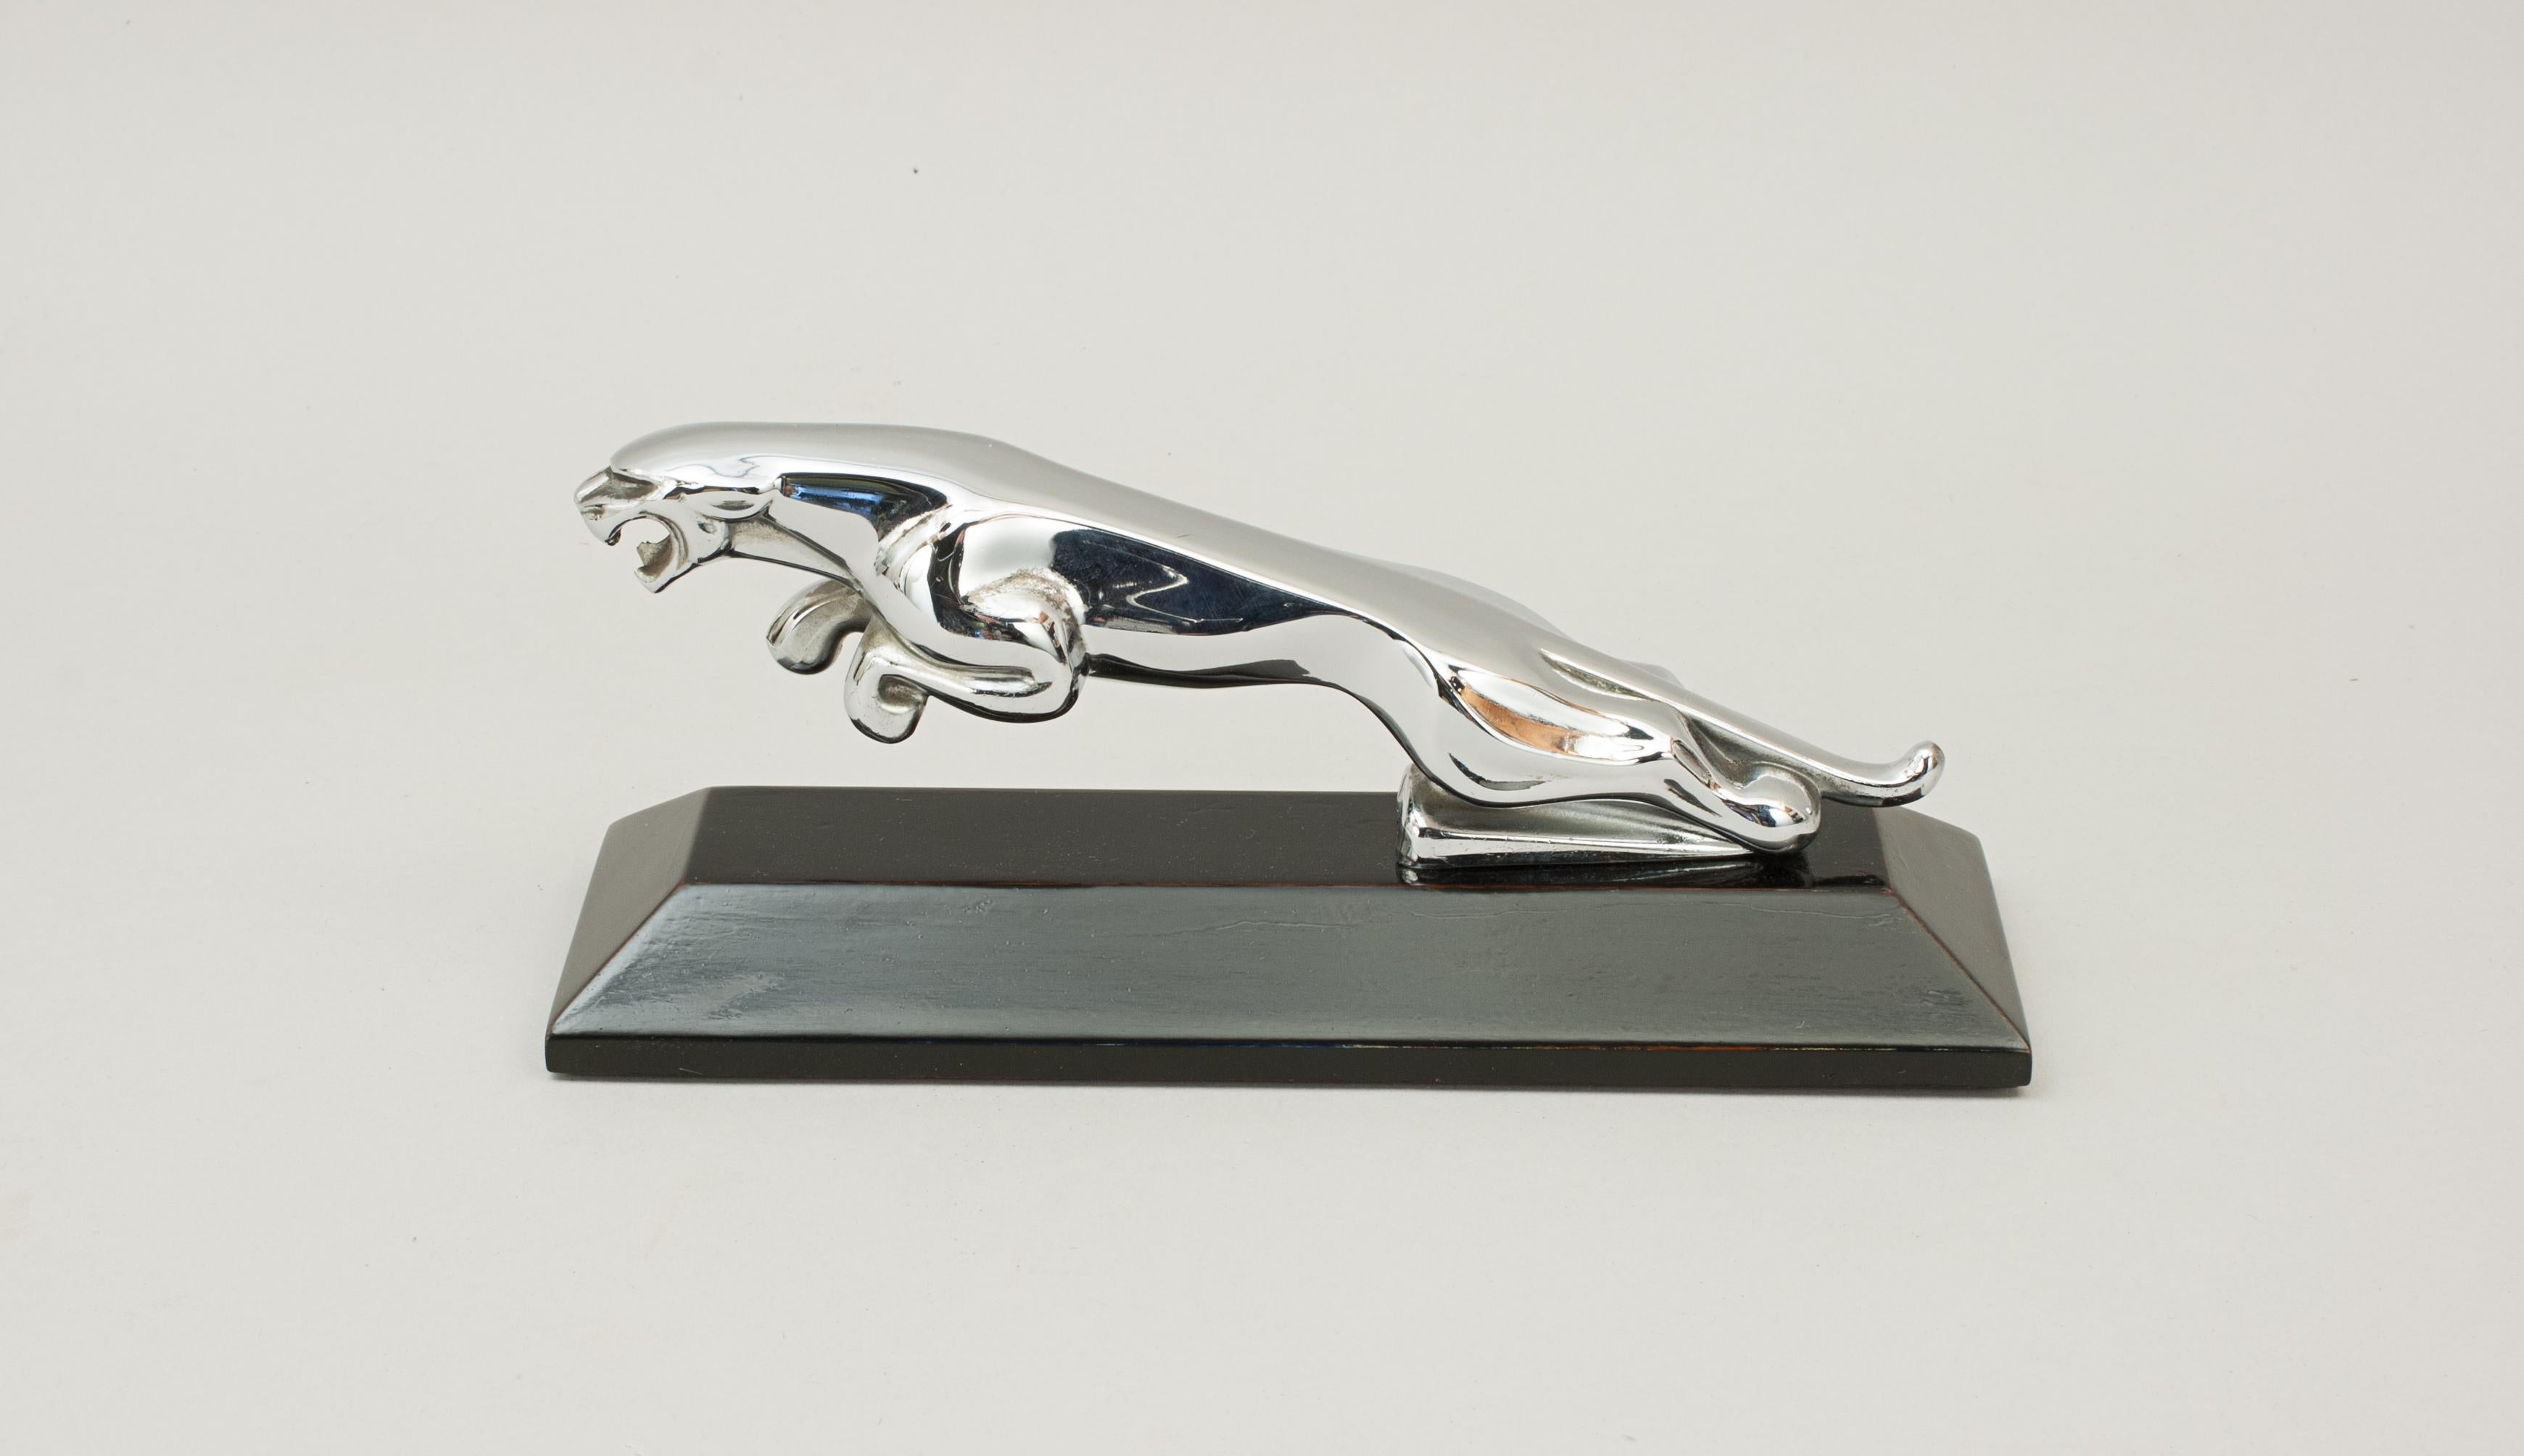 Jaguar Car Mascot. Chromed Jaguar car mascot in excellent condition mounted onto an ebonised base. The snarling mouth, ears tight against the head, the right front paw slightly ahead of the left, leaping through the air with rear legs outstretched,